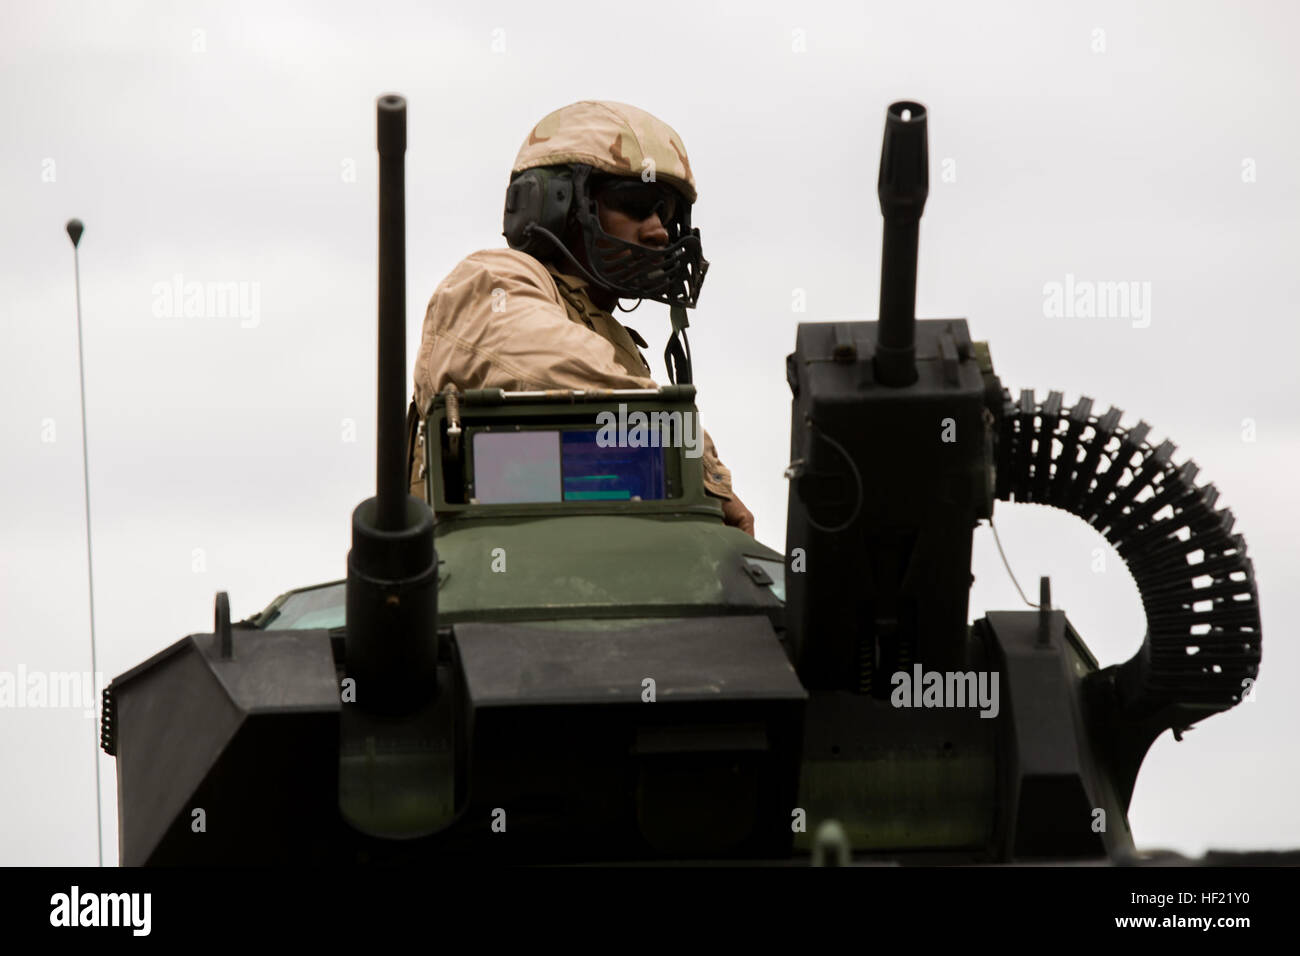 U.S. Marine Corps Lance Cpl. Horace Leonard an Assault Amphibious Vehicle (AAV) Crewmember, with Charlie Company, 3rd Assault Amphibious Battalion, 1st Marine Division, sits in the turrent of an AAV at a live fire training event during Exercise Ssang Yong 14 at Suesongri, South Korea, March 26, 2014. Exercise Ssang Yong 14 is conducted annually in the Republic of Korea (ROK) to enhance interoperablility between U.S. and ROK forces by performing a full spectrum of amphibious operations while showcasing sea-based power projection in the Pacific. (U.S. Marine Corps Photo by Lance Cpl Tyler S. Die Stock Photo